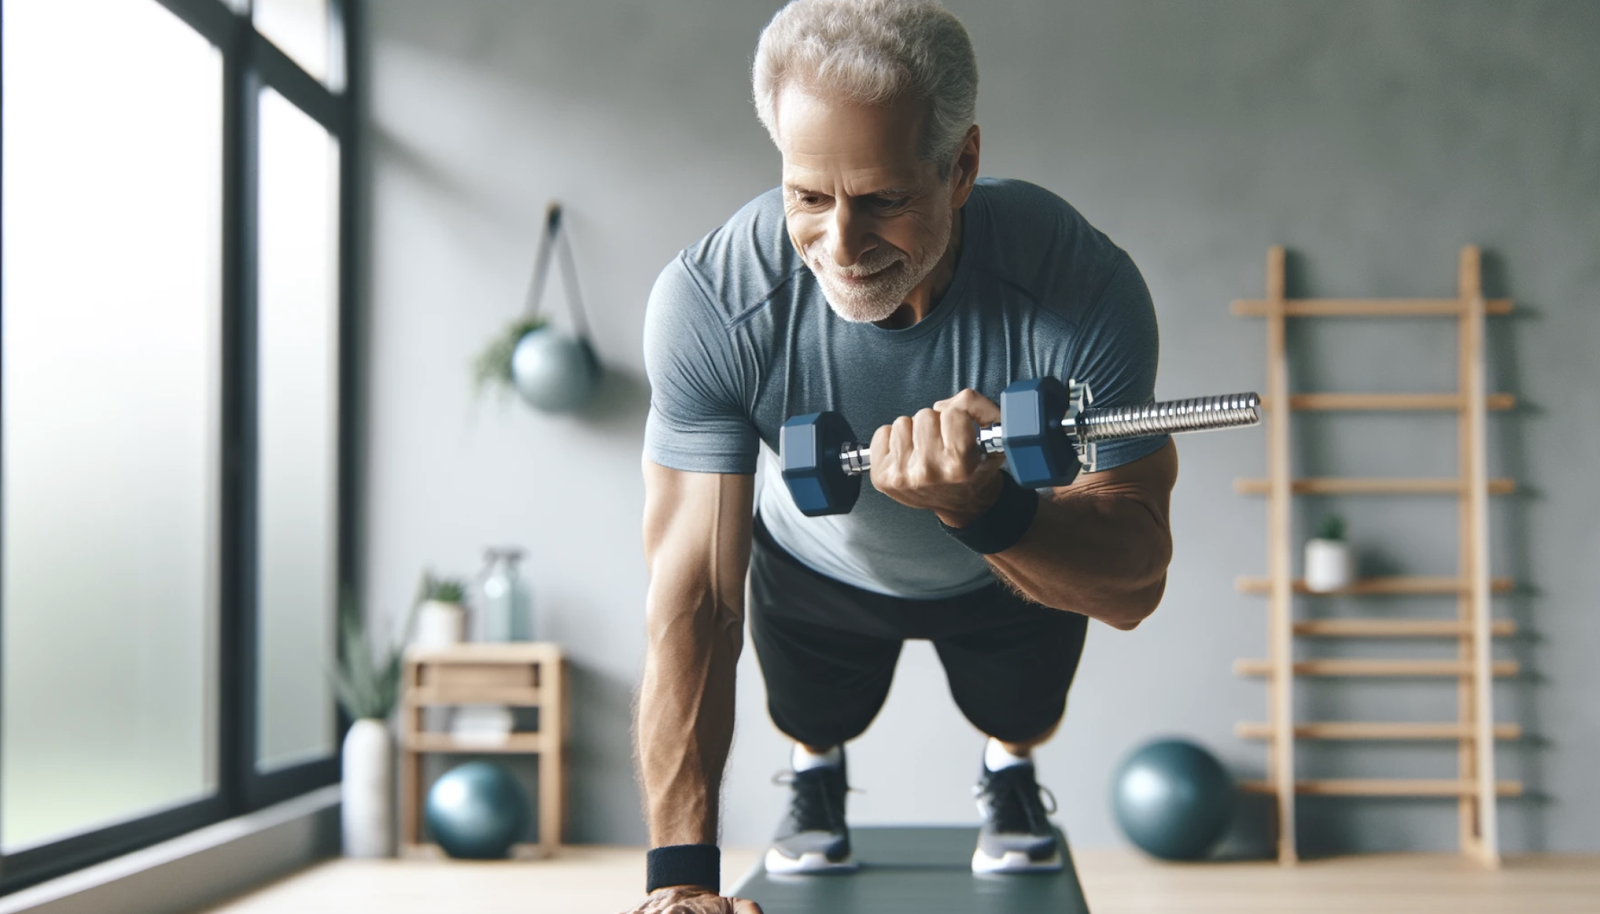 Are you finding it more challenging to build muscle after reaching the age of 40? You're not alone. Many people experience a decrease in muscle mass and strength as they age, making it harder to achieve their fitness goals.